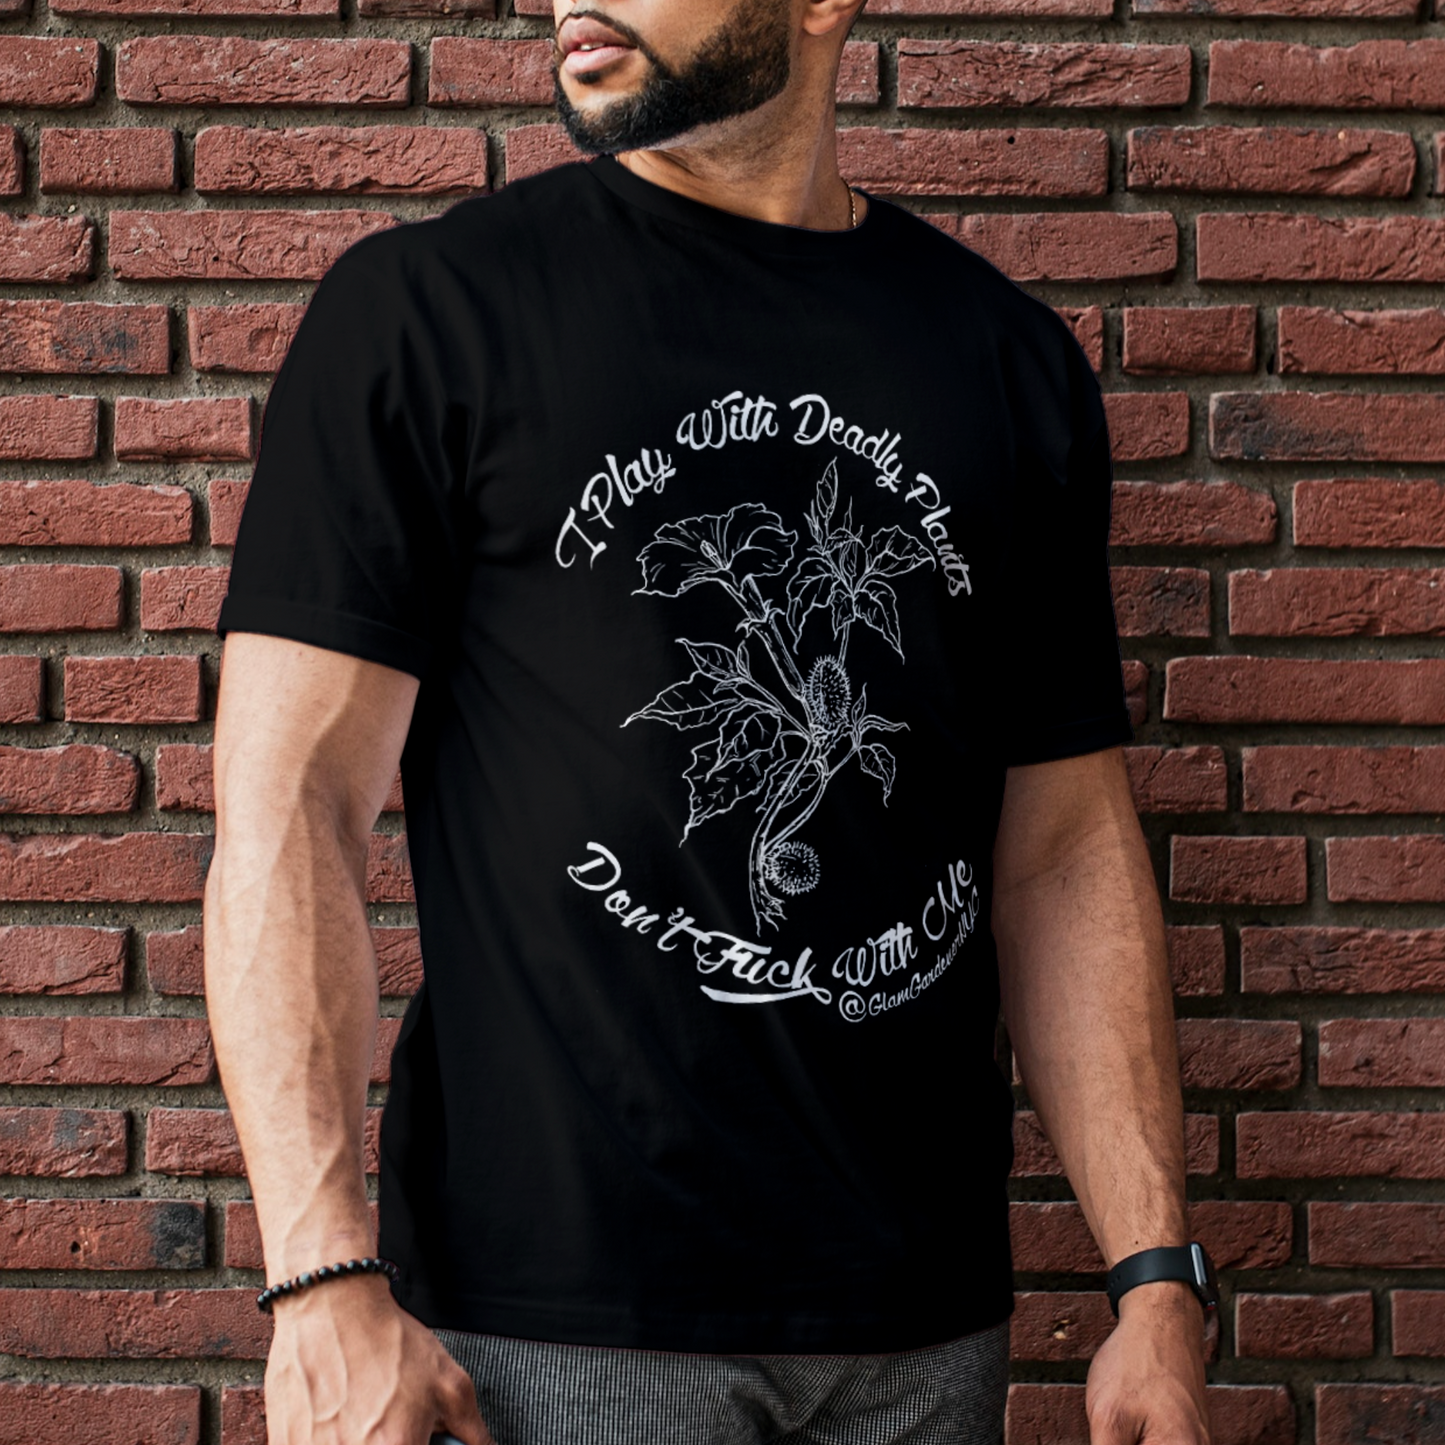 I play with deadly plants, don't f*ck with me featuring datura stramonium (angel's trumpet) organic cotton t-shirt